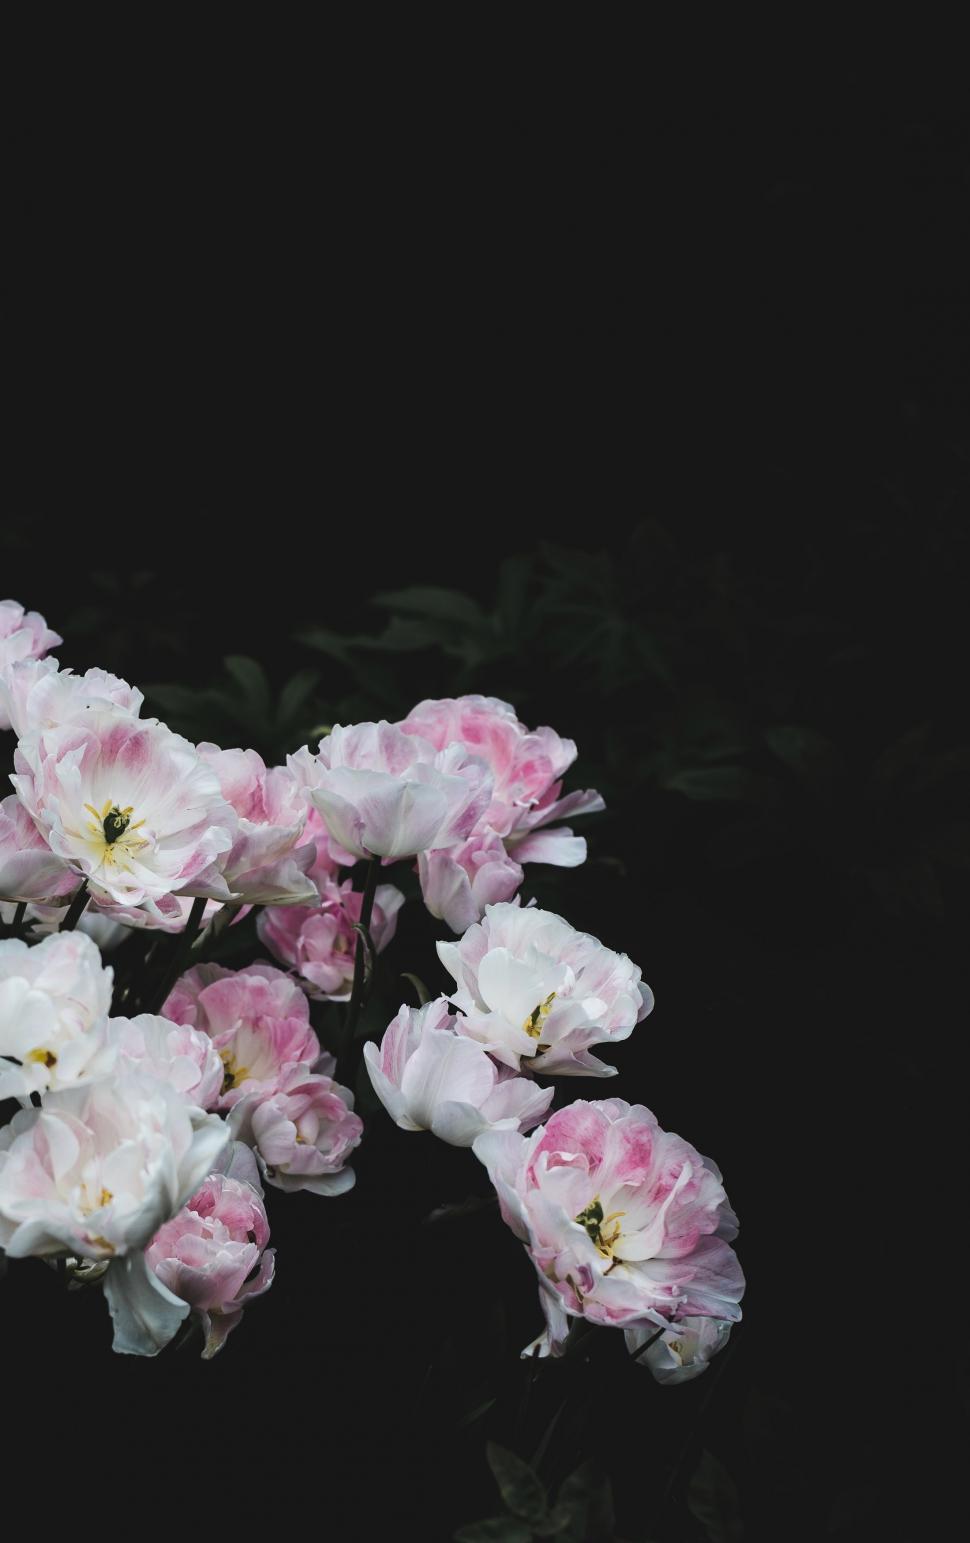 Free Image of Pink and White Flowers on Black Background 